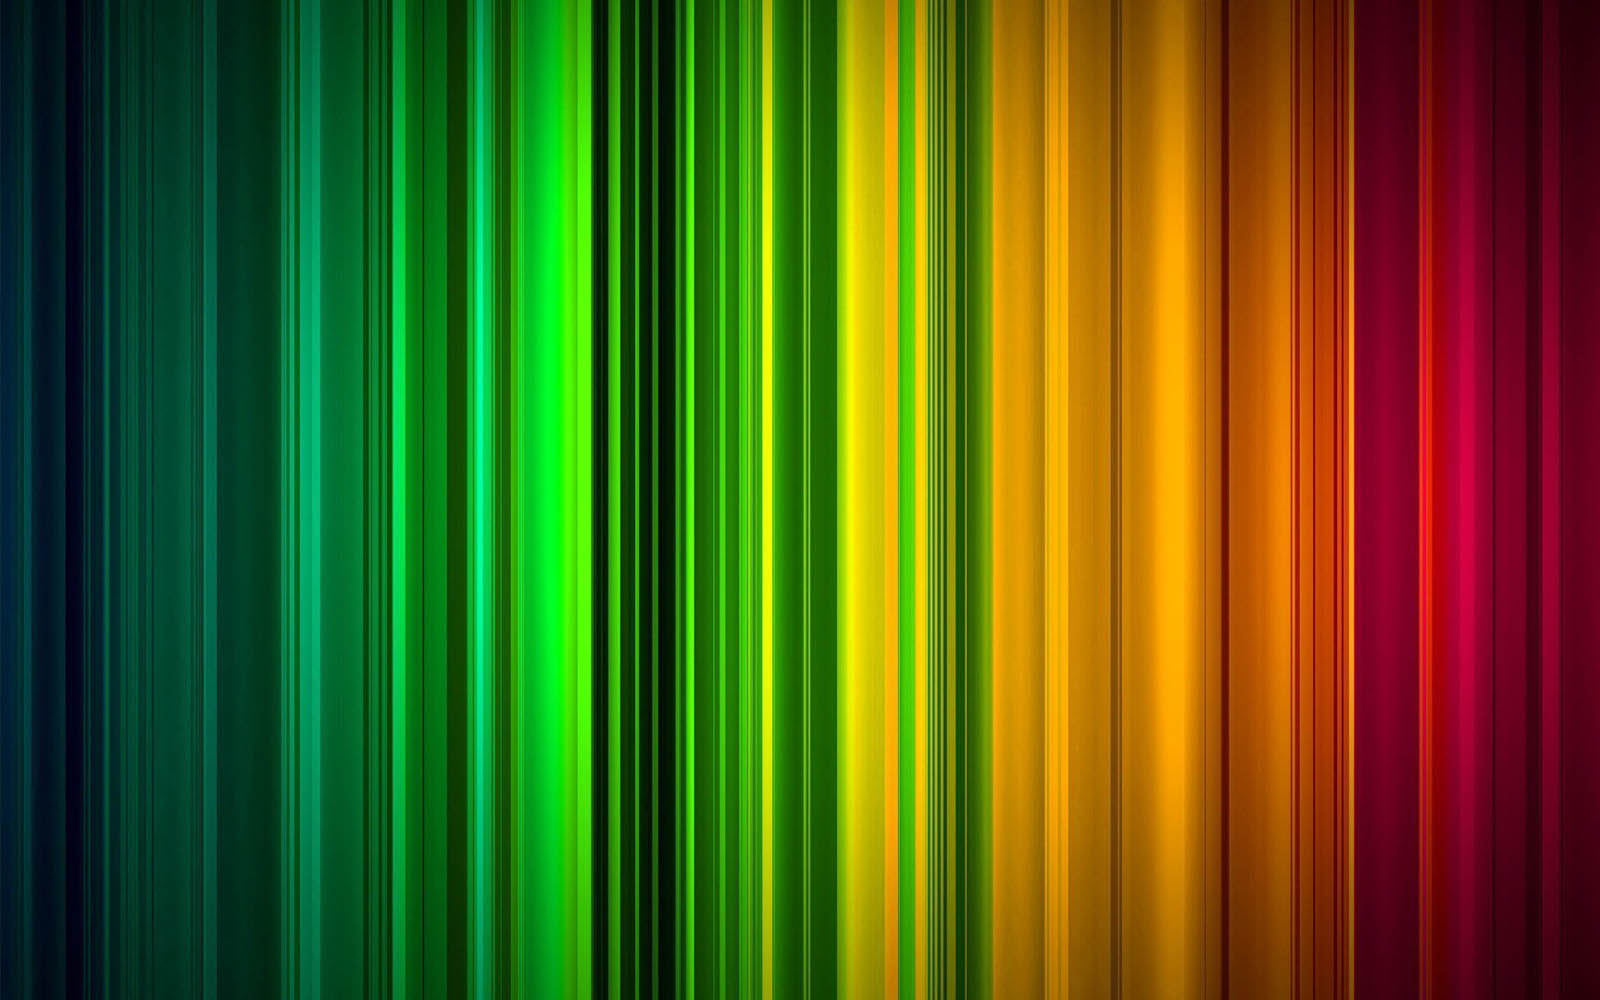 Wallpapers Colorful Lines Wallpapers Afalchi Free images wallpape [afalchi.blogspot.com]